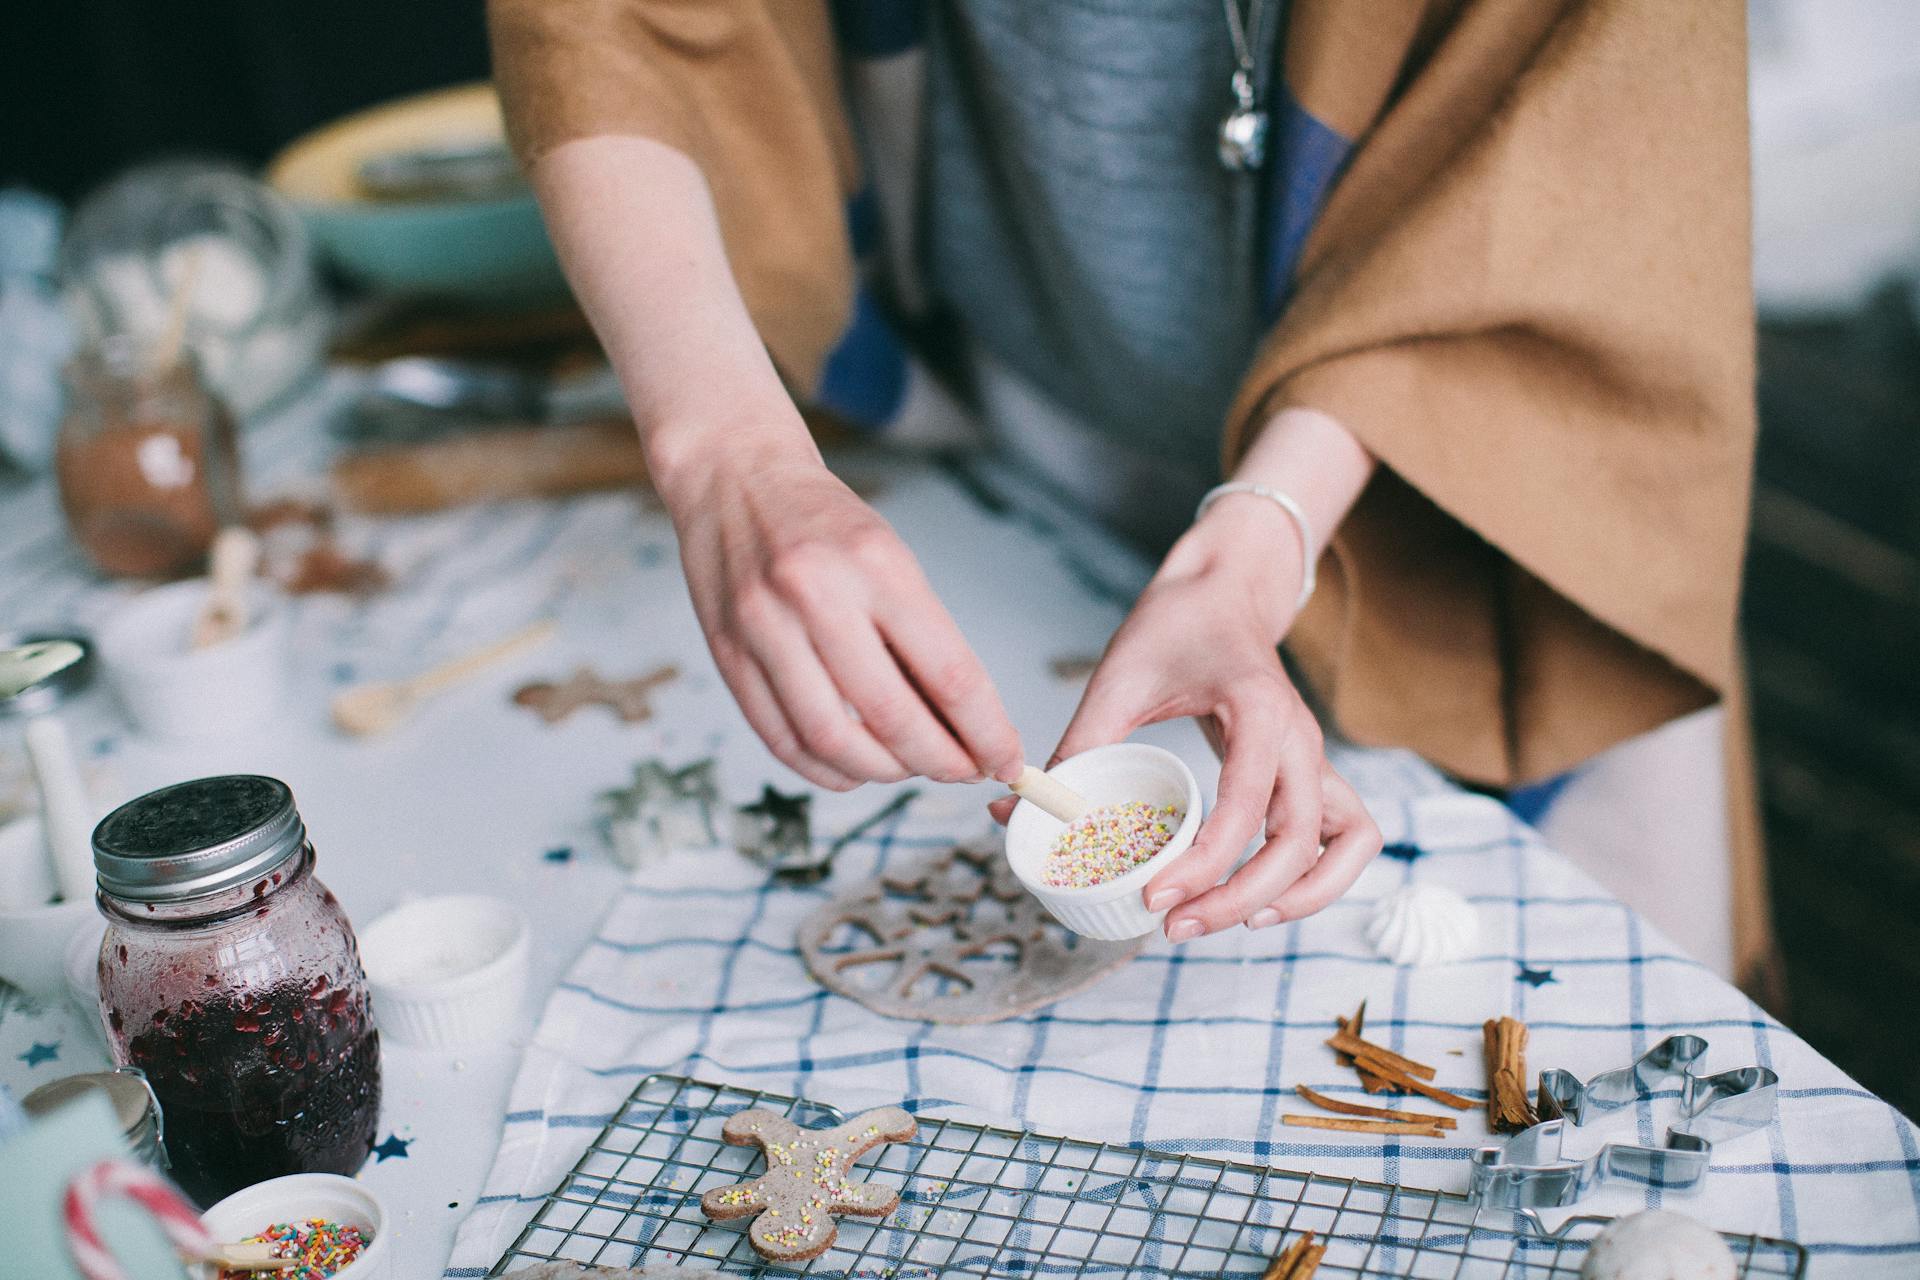 A person baking gingerbread cookies | Source: Pexels